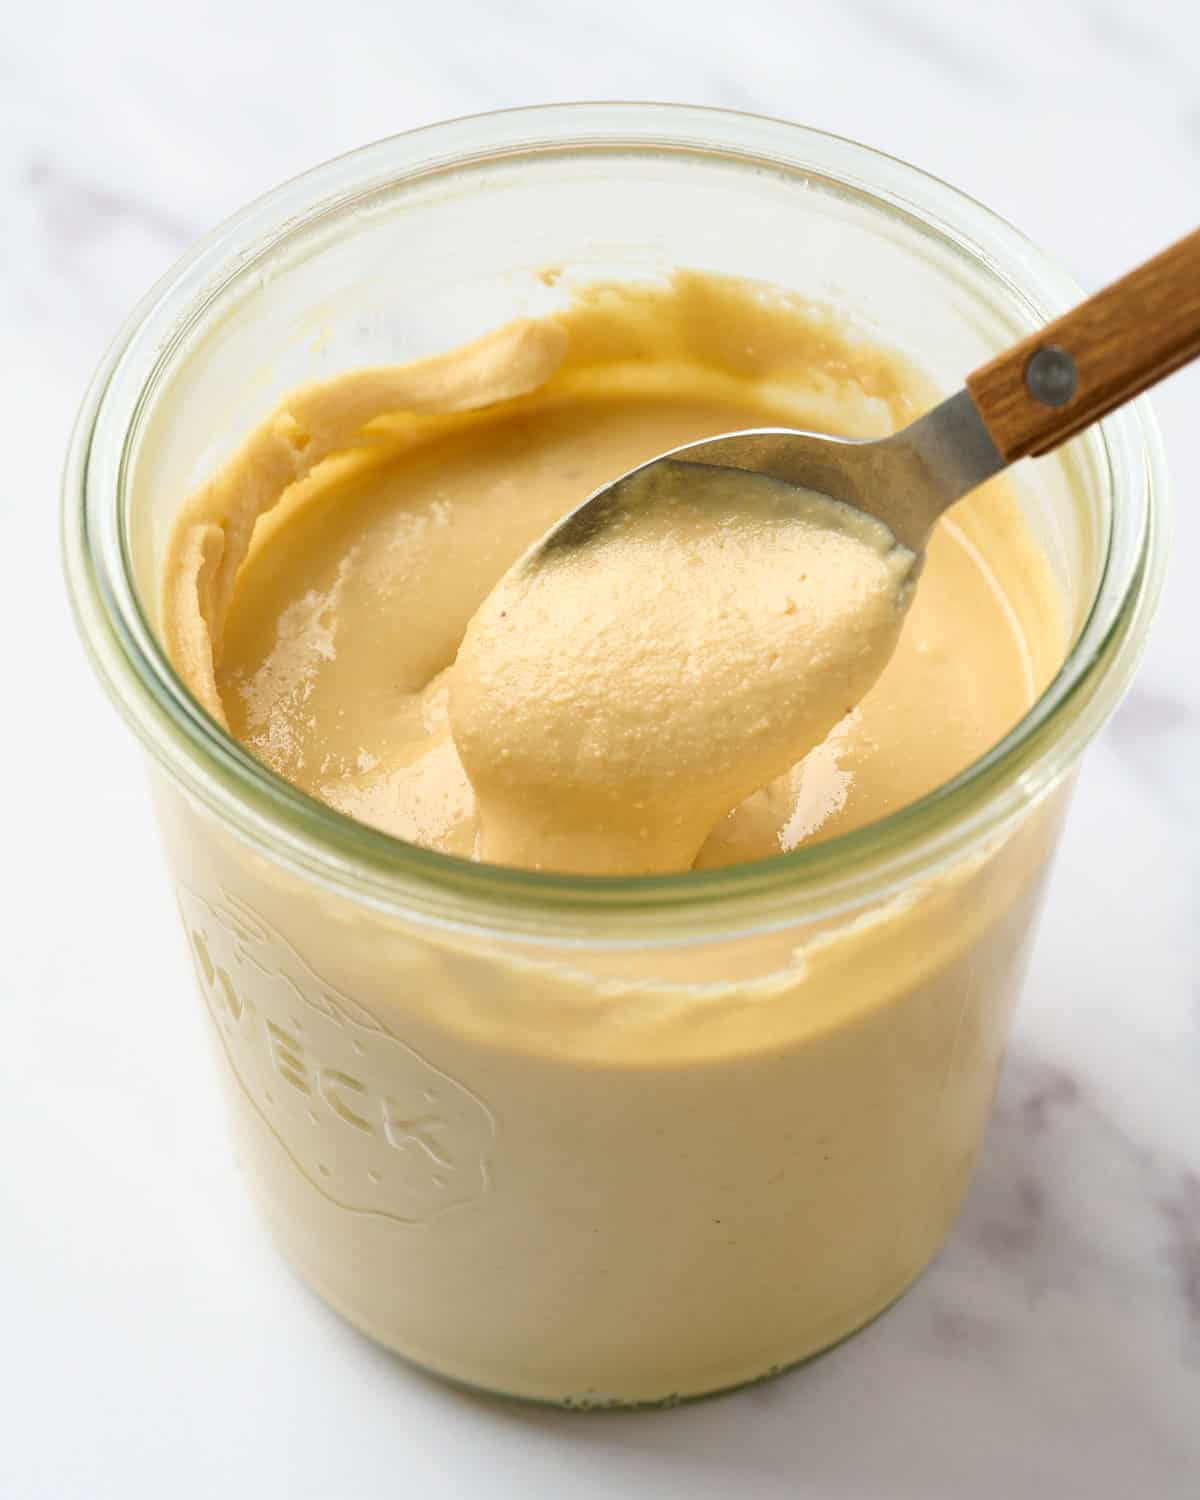 A jar of cashew butter with a spoon inside.